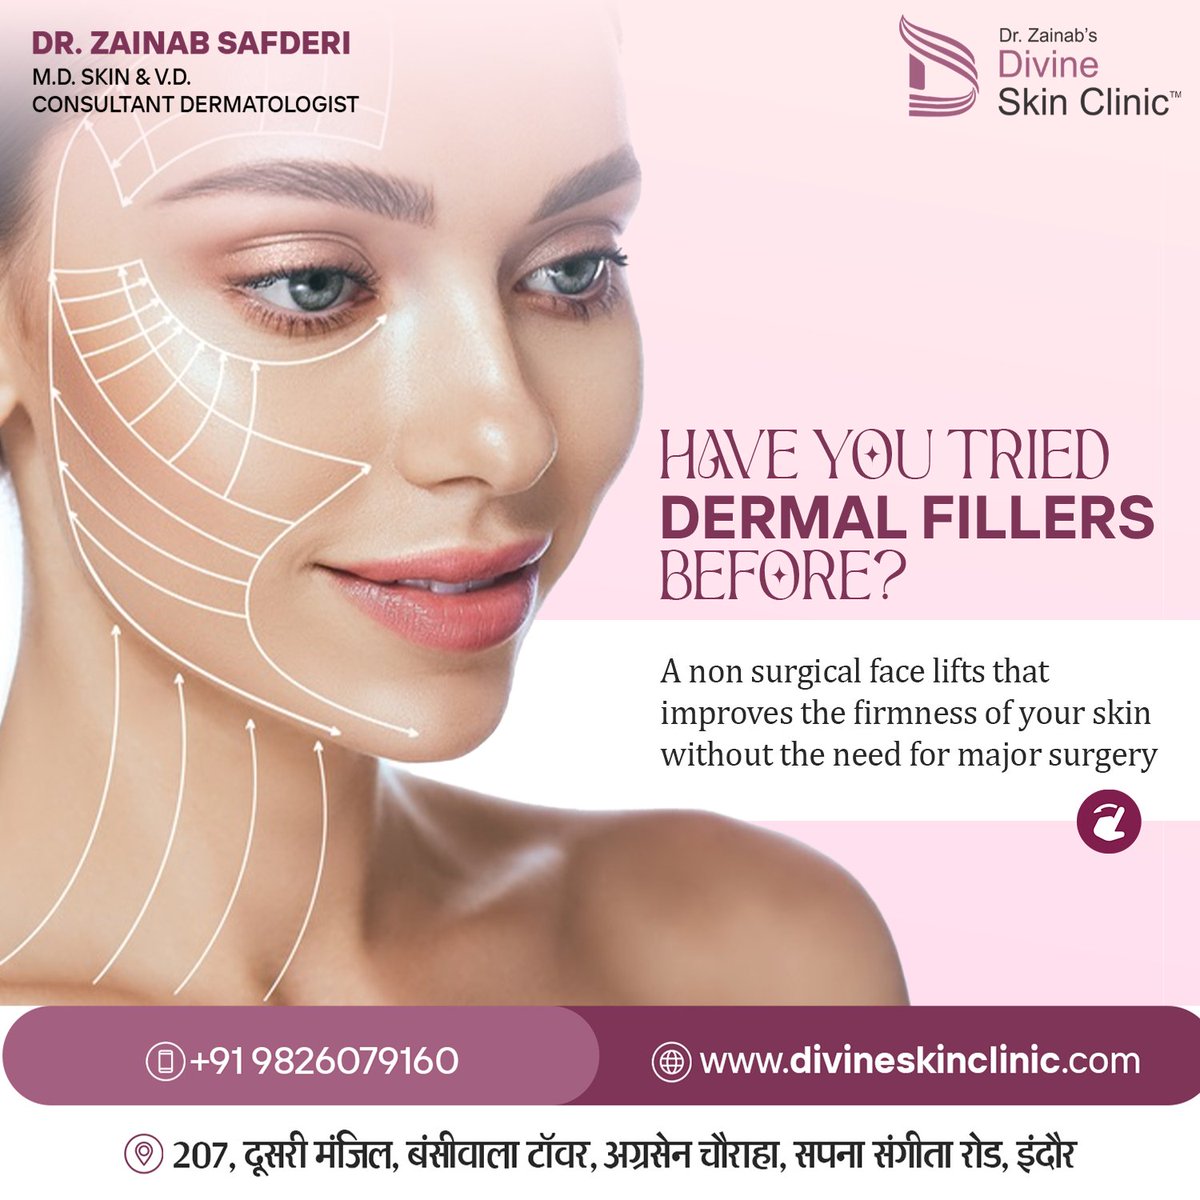 Want a youthful look without surgery? Try dermal fillers! They lift and firm your skin, no operation needed👄☺️ Consult Dr. Zainab Safderi! 📞+91 9826079160 📍207, Bansiwala Tower, Near, Agrasen Square, Navlakha, Indore #NonSurgicalLift #FirmSkin #SkinRejuvenation